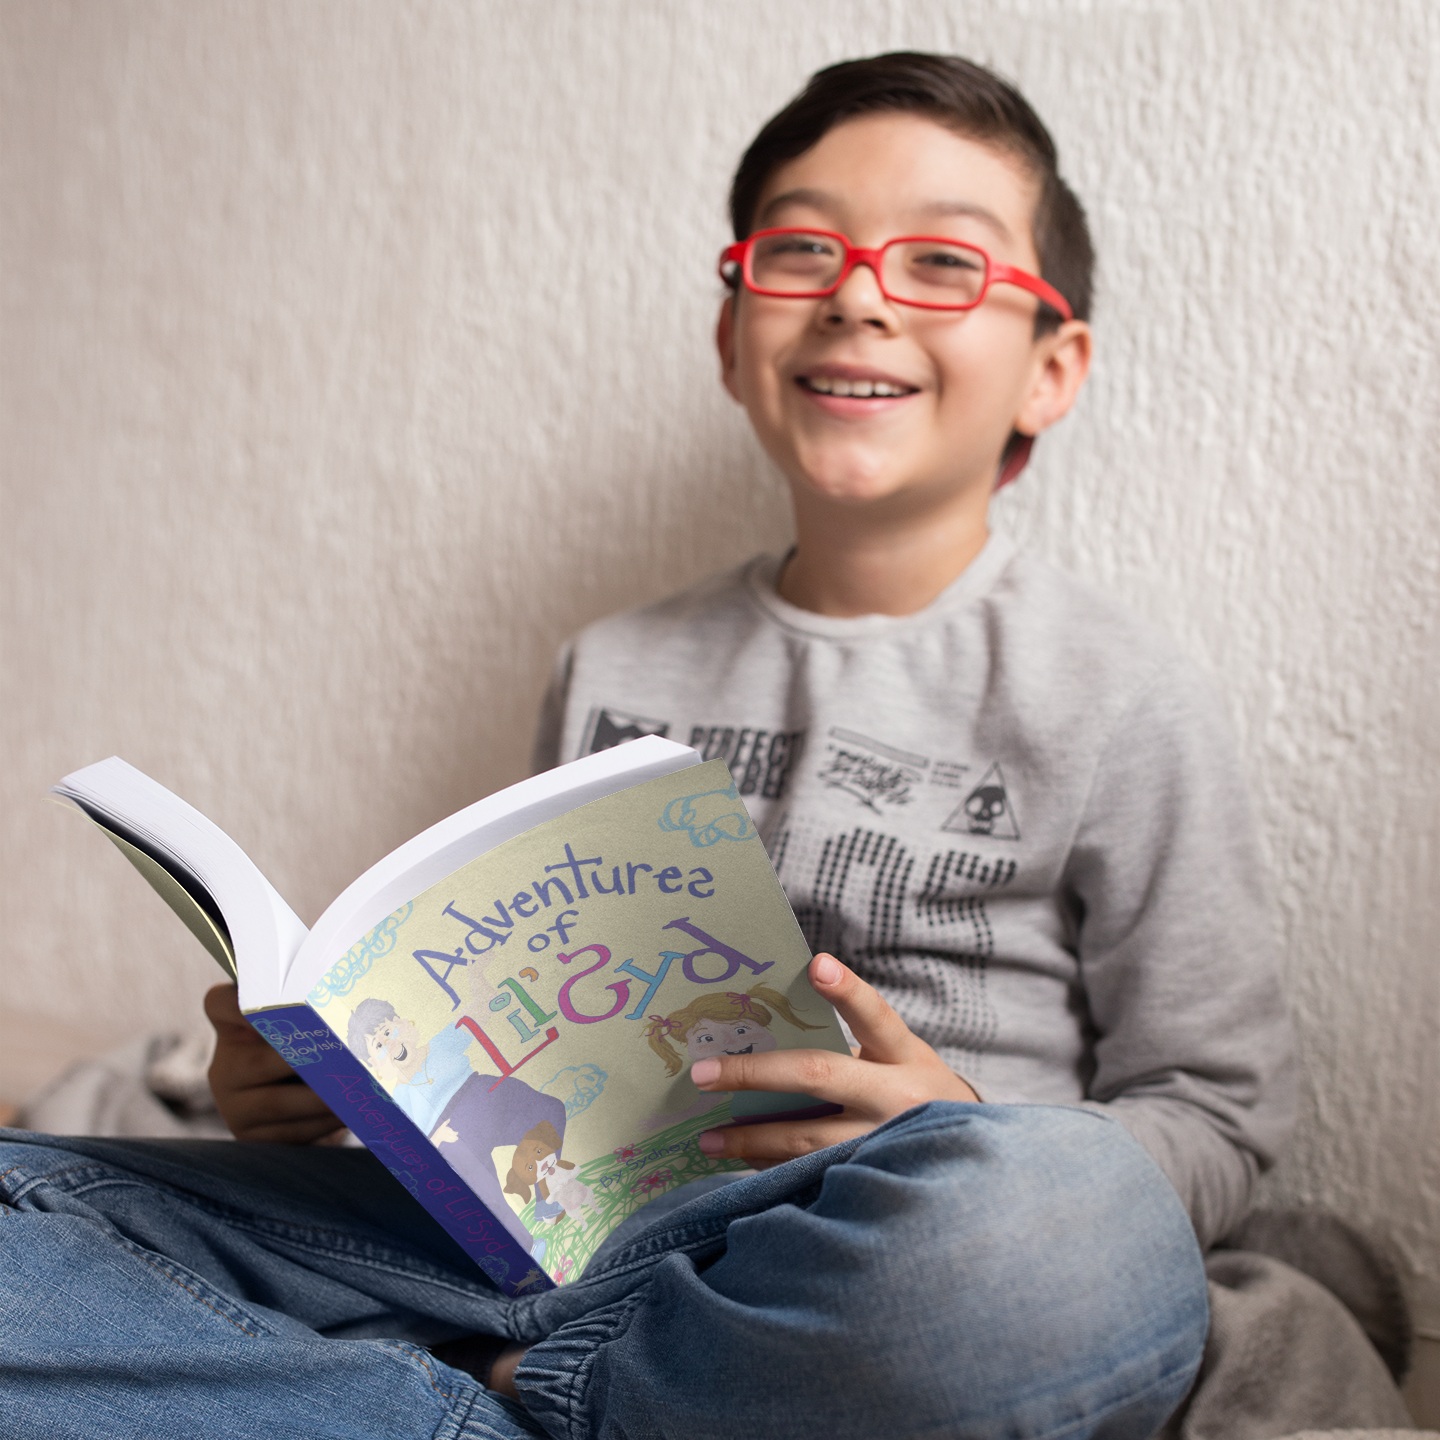 mockup-of-a-happy-boy-with-red-glasses-reading-a-book-in-his-room-a19149.jpg